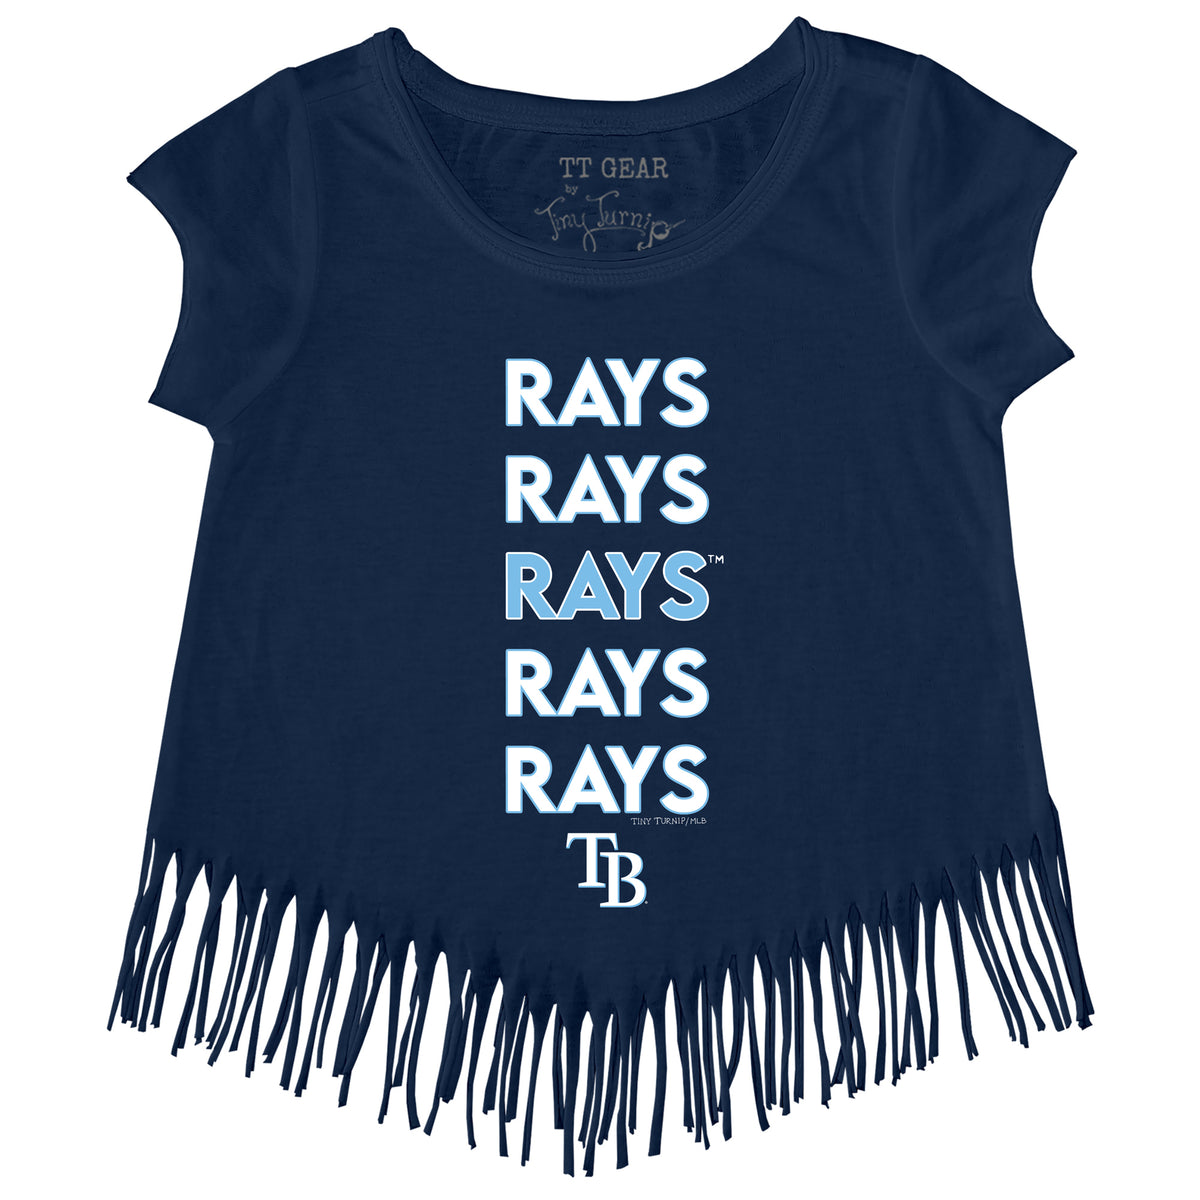 Tampa Bay Rays Stacked Fringe Tee